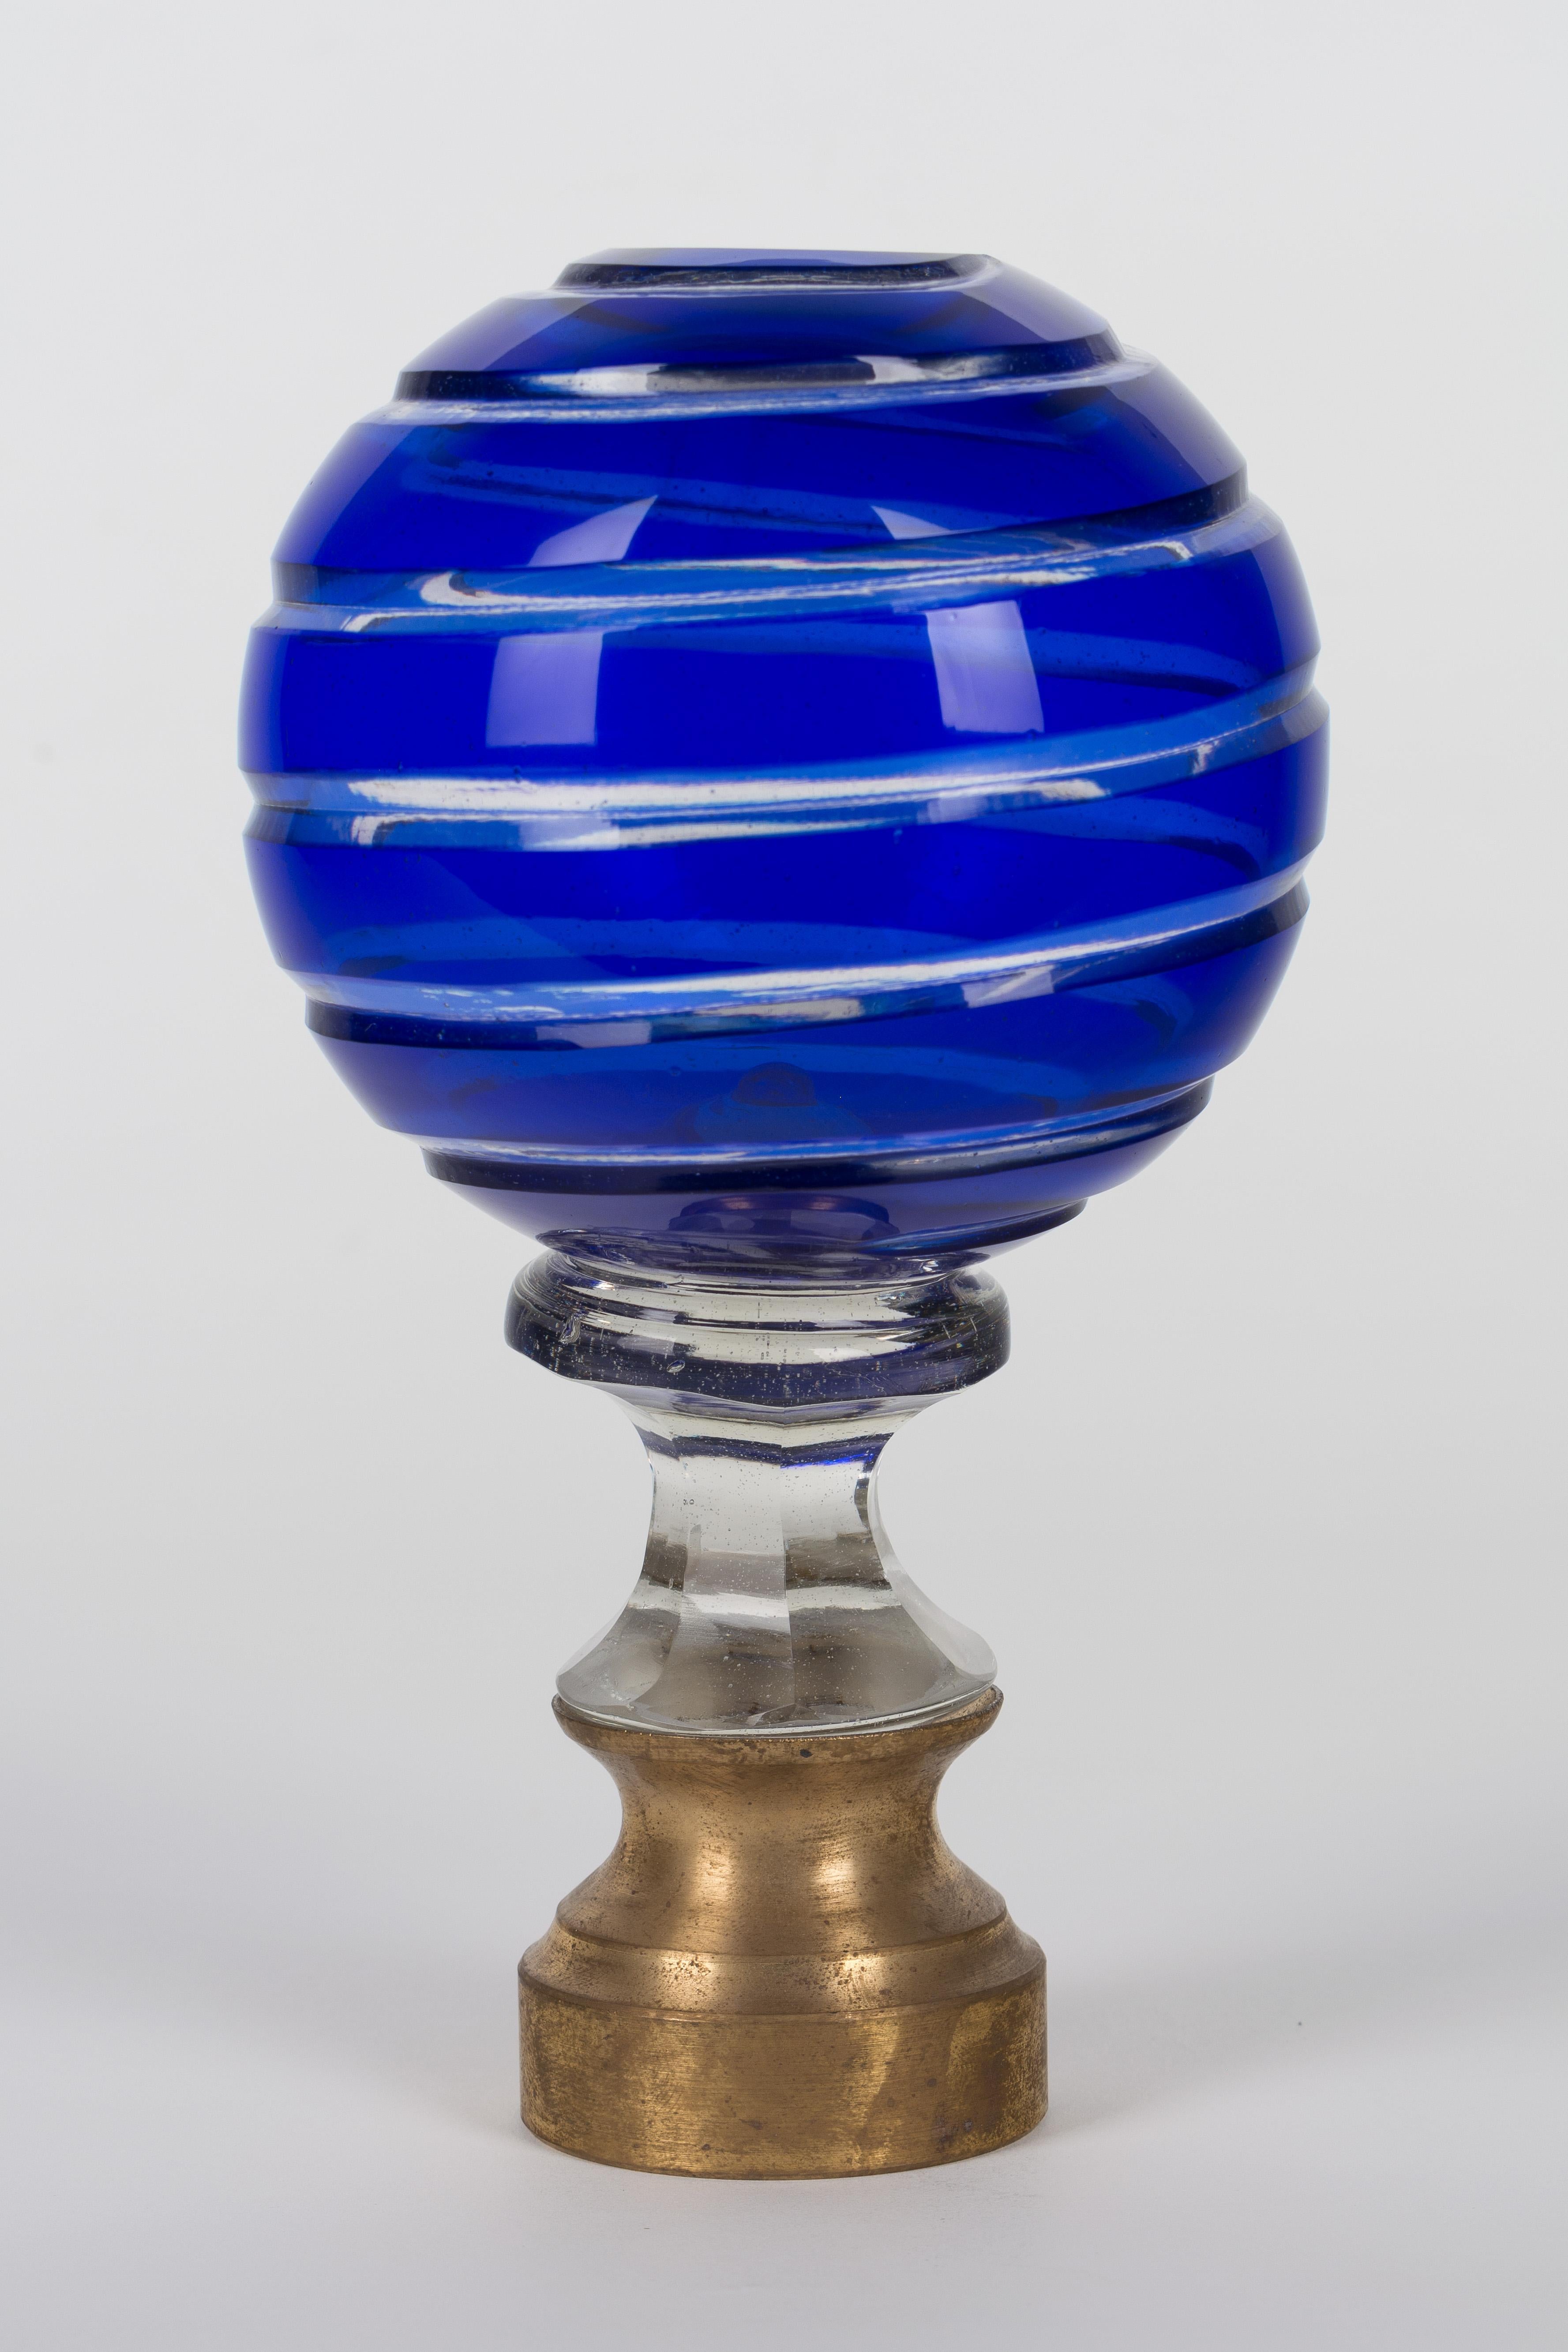 An early 20th century French cobalt colored cut glass newel post finial or boule d'escalier. These wonderful finials were used as decorative elements at the bottom of a staircase on the newel post. Brass hardware base. We have several others